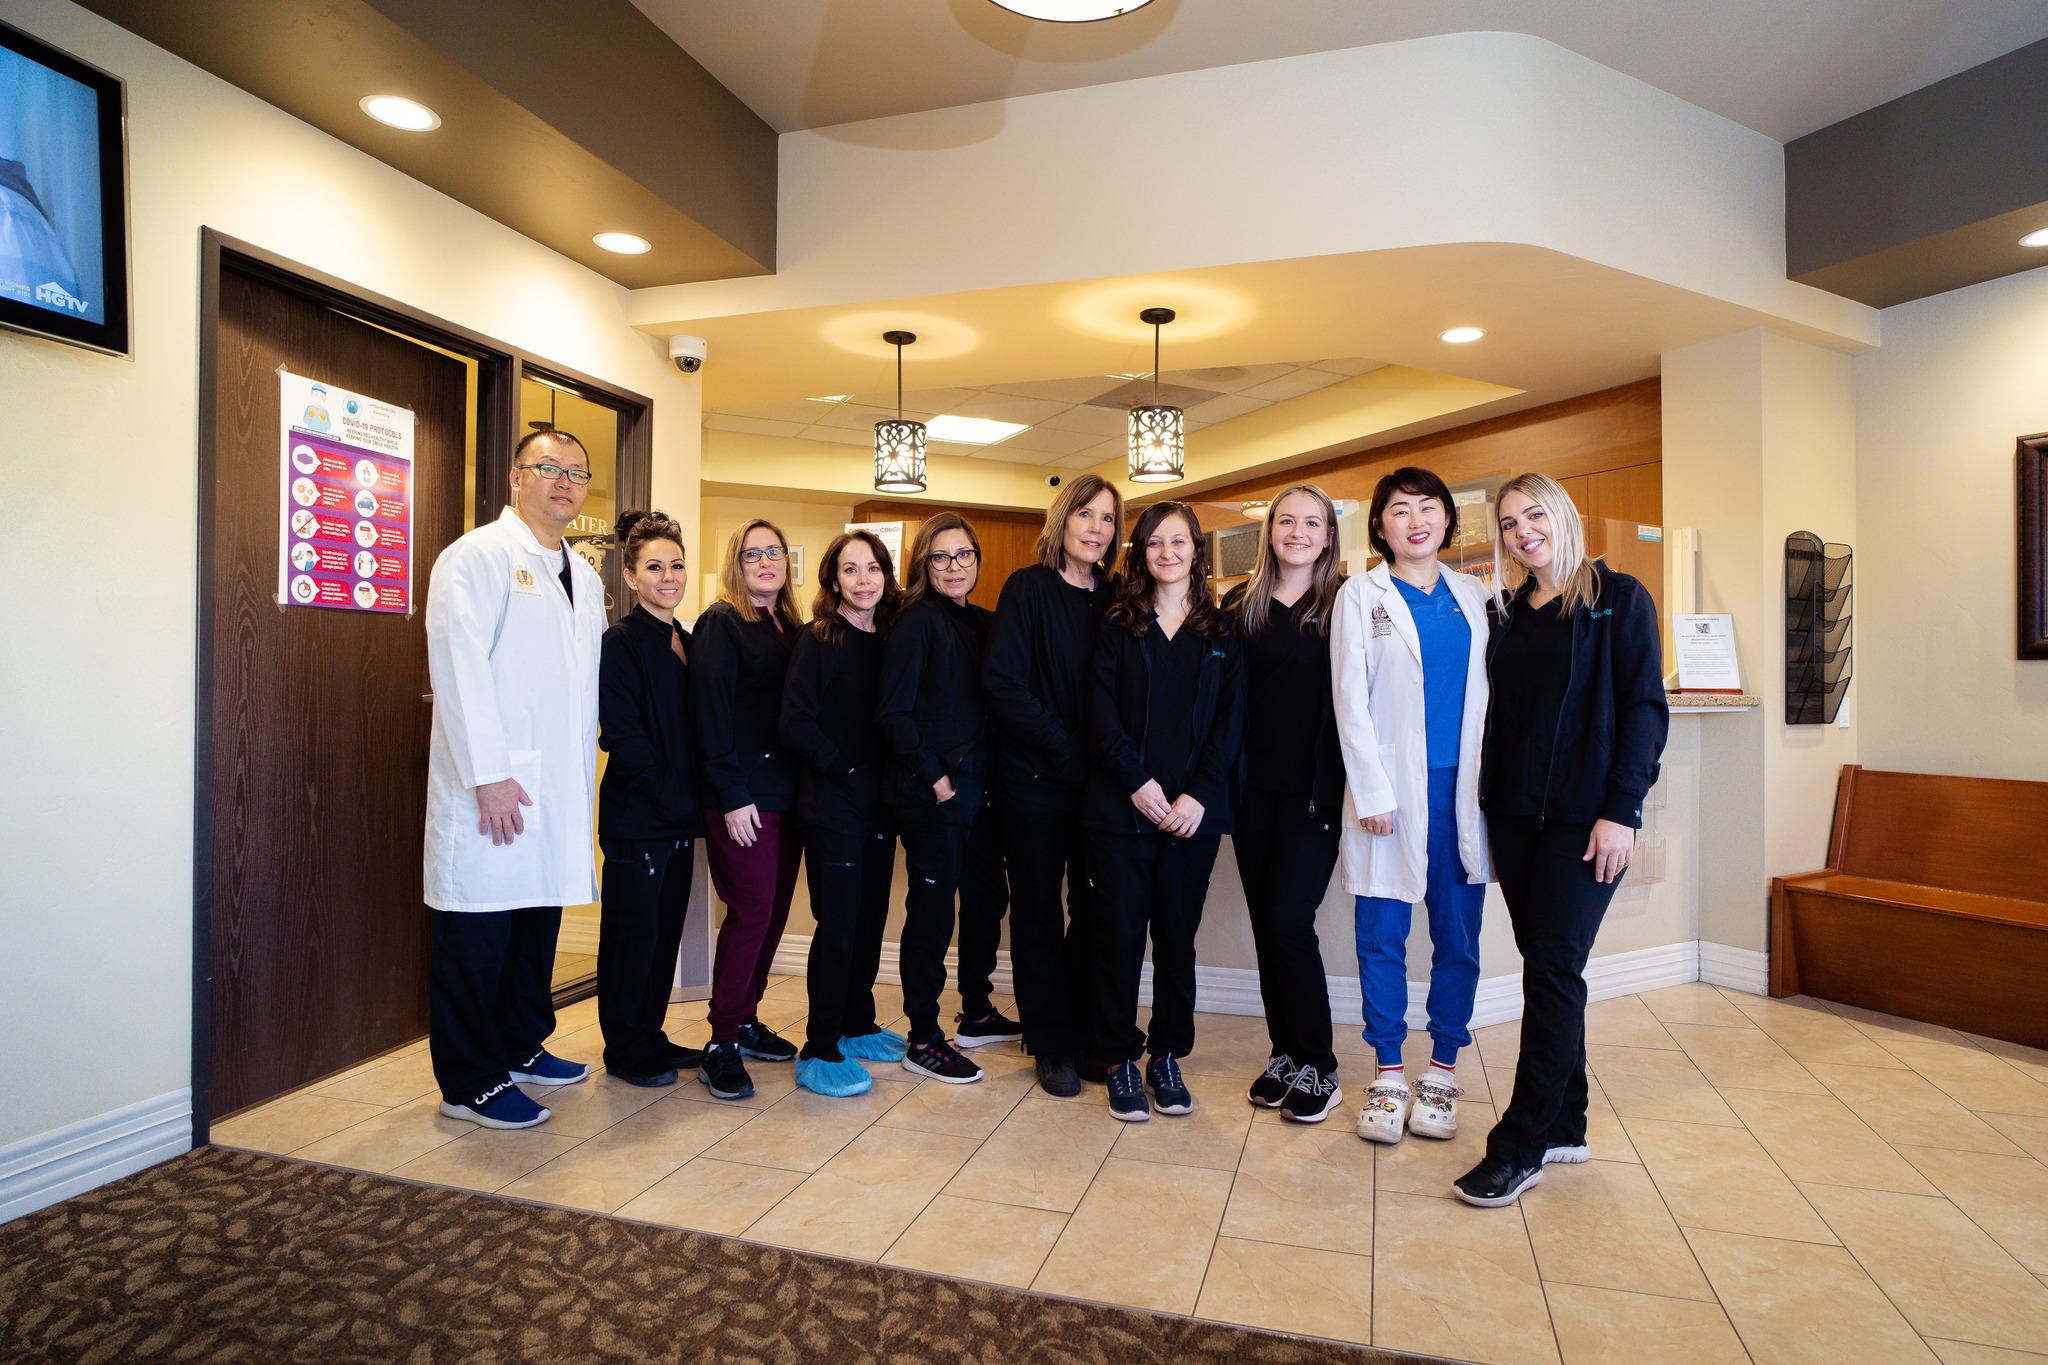 Lombardo & Cho Dentistry - Team Photo - Your Dental Home in Yucca Valley AZ Specializing in Dental Implants, Cosmetic Dentistry, Same Day Crowns, Dental Veneers, Oral Surgery, and More